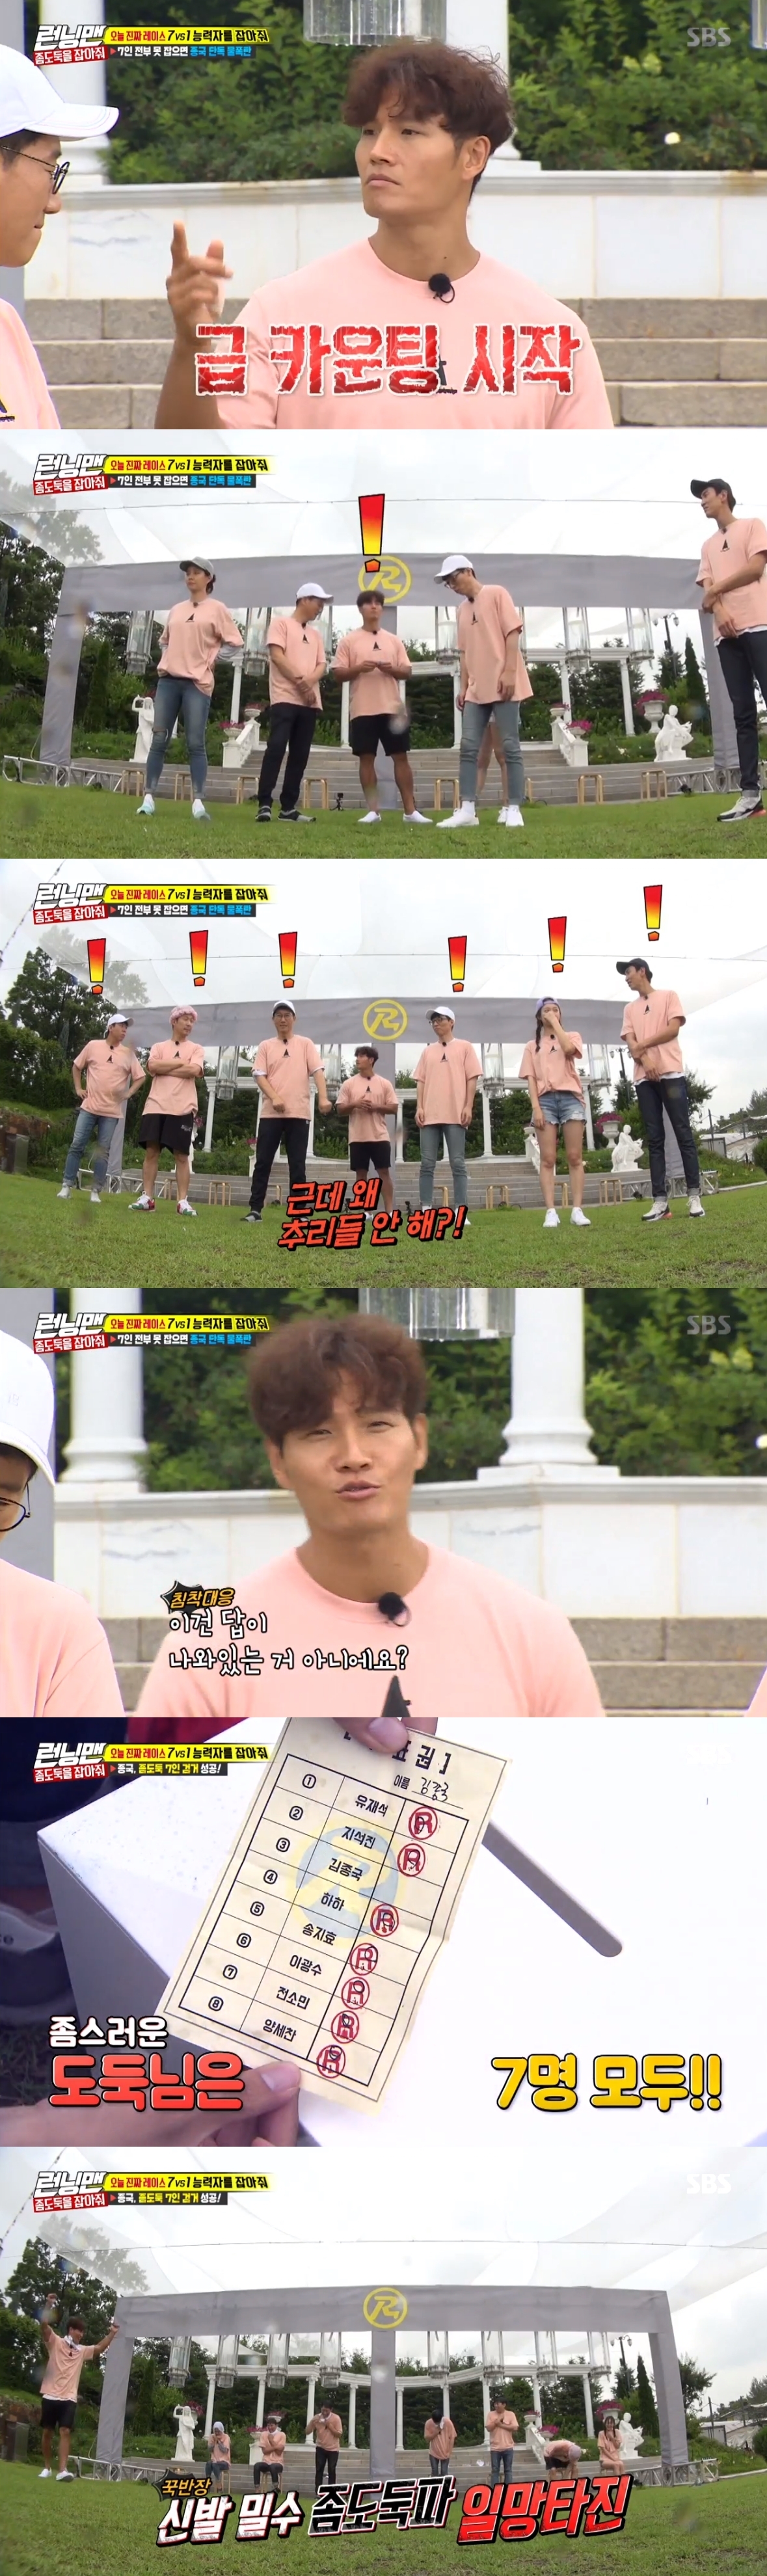 Seoul) = Kim Jong-kook showed a special touch.On SBS Running Man broadcasted at 4:50 pm on the 29th, members who searched for The Little Thief who stole Kim Jong-kooks shoes were drawn.On that day, Ji Suk-jin was identified as a potential suspect, and his actions and words were all suspected by members; after the group mission, the Little Thief hint was released.The hints released included an image of The Little Thief wearing an umbrella; the point on the arm led the members to cut The Little Thief.When Kim Jong-kook was wrong in succession in the English 369 Game, he was also suspected; Lee Kwang-soo said, I was long-suffering, but this time I was sure.Kim Jong-kook shocked everyone by saying, Rise it, it does not matter.To get a hint, a game was played to throw the shoes pocket away; a pre-mission was given to put the word card on the hip to reduce the weight of the shoes pocket.Ji Suk-jin danced in front of him looking for the word bean, but eventually failed to pick up the bean word due to the interruption of Kim Jong-kook who aimed at it.Kim Jong-kook received two hints: a picture of The Little Thiefs ankle and a picture of the killers hand with shoes.The members who saw the photos in the hints that were released later were convinced that The Little Thief was a woman.Kim Jong-kook looked at the Jeon So-min wrist and was convinced that he somehow gave me flowers.This mission was not the search for The Little Thief.For the members who have never won against Kim Jong-kook, seven people except Kim Jong-kook became a team and a real mission to deceive Kim Jong-kook was hidden.Kim Jong-kook should not know that seven people are a team, and Kim Jong-kooks shoes should be hidden as a relay.Its getting an opening, get ready for additional filming, Haha voiced.The hint photo showed that there were seven criminals; Lee Kwang-soo, who noticed this, informed another member that all our signatures are on the hint.Yang found that the silhouette of another criminal was seen in the hint photo of Jeon So-mins eyes and told Kim Jong-kook.Kim Jong-kook suspected, I dont think its one.Before the last vote, Kim Jong-kook surprised everyone by saying, Why do not you make reasoning? In the beginning, did I say that The Little Thief was one or all?In the end, Kim Jong-kook identified all seven people except himself as criminals, and the rest of the members had to be hit by water bombs.